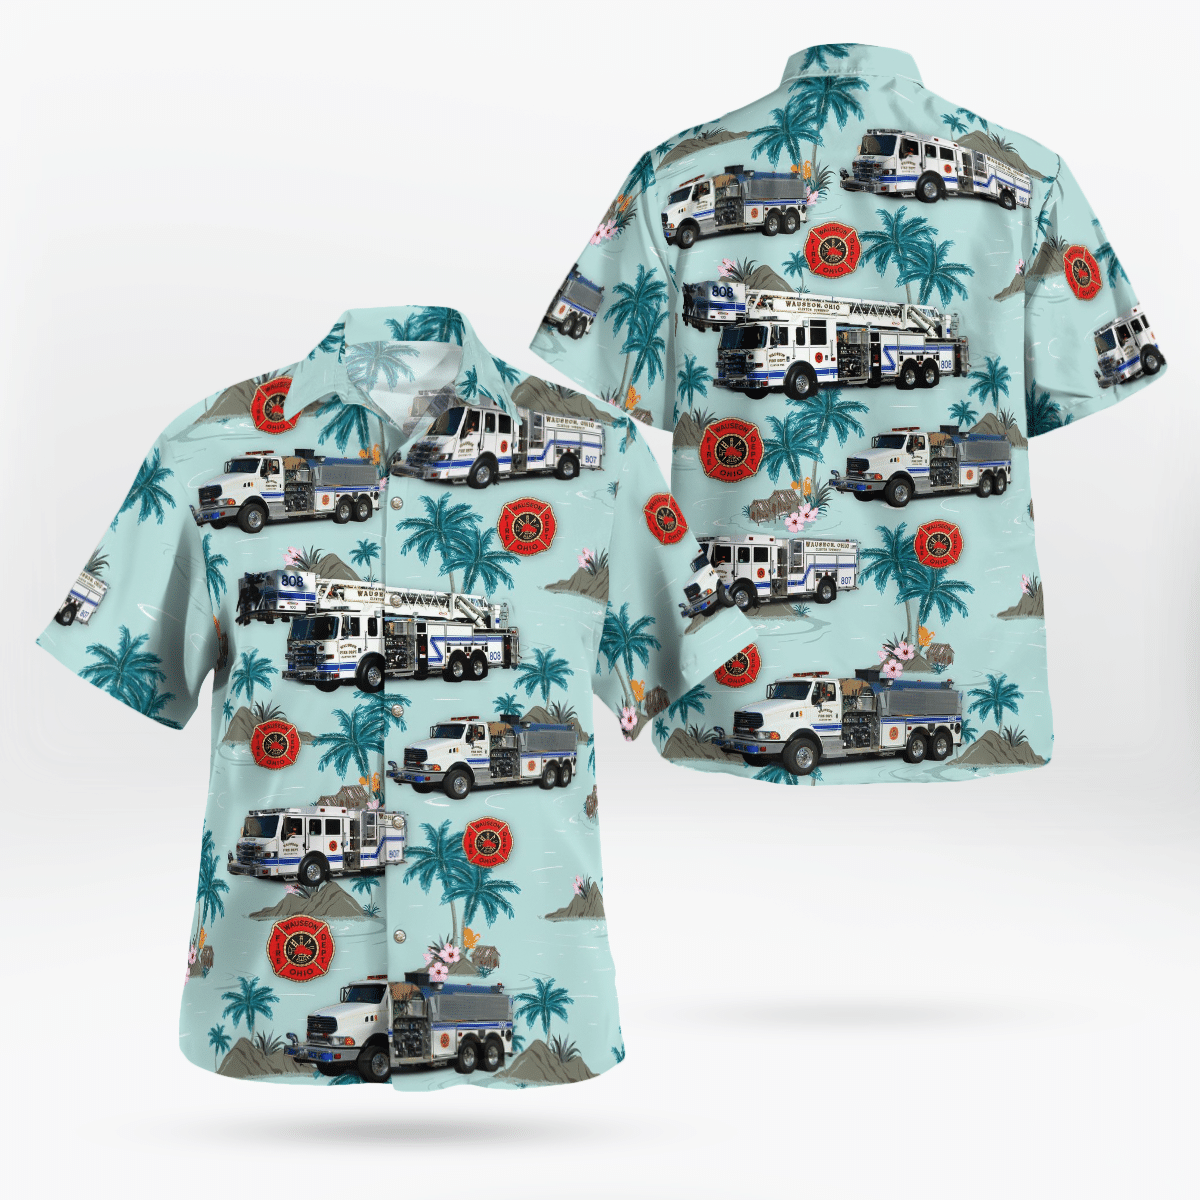 Consider getting these Hawaiian Shirt for your friends 21